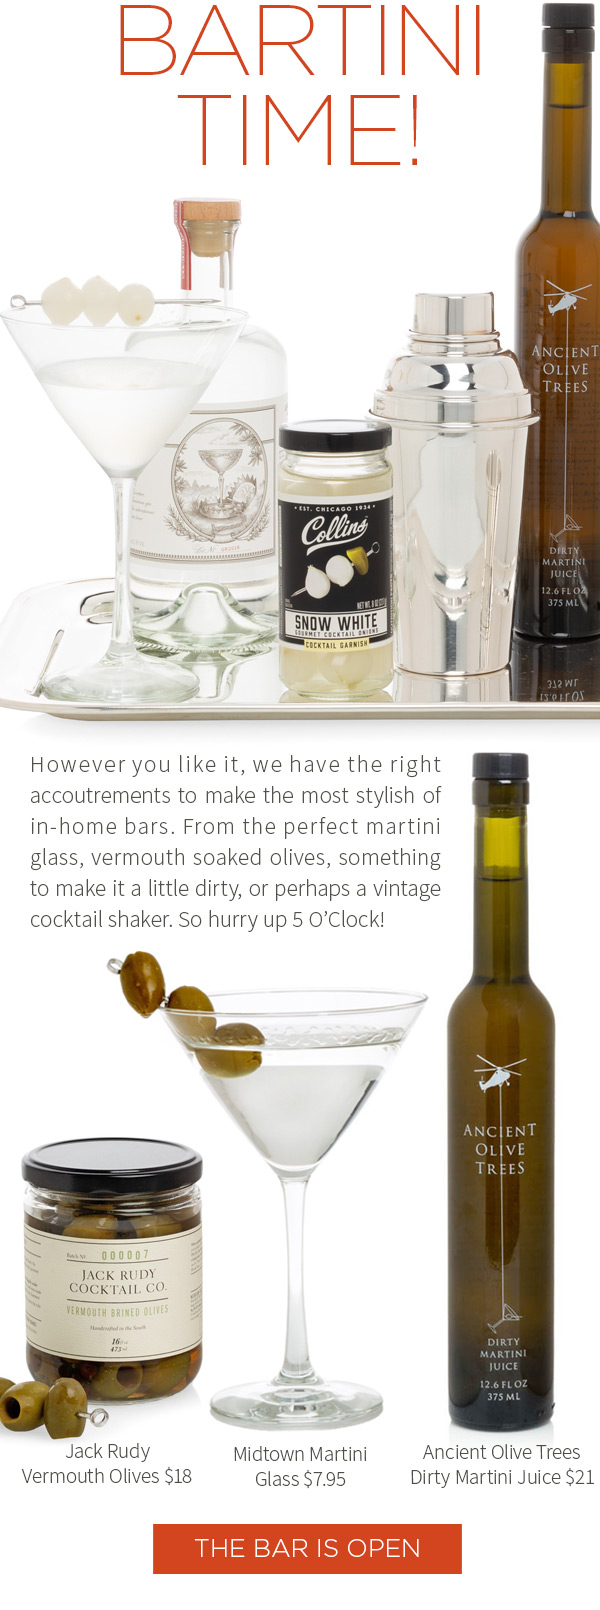 Bartini Time! However you like it, we have the right accoutrements to make the most stylish of in-home bars. From the perfect martini glass, vermouth soaked olives, something to make it a little dirty, or perhaps a vintage cocktail shaker. So hurry up 5 O'Clock! The bar is open!